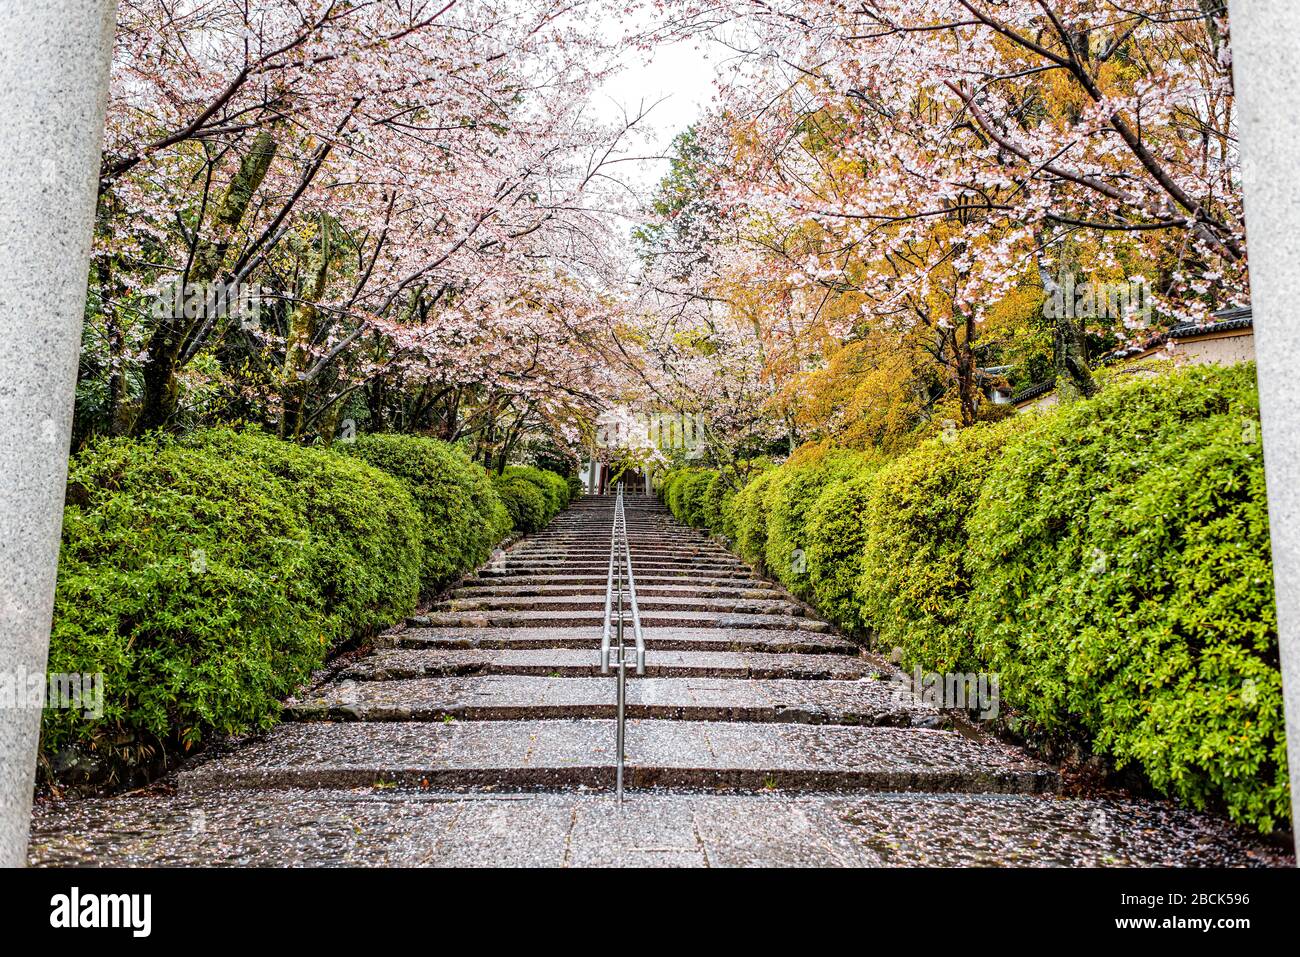 Stairs wet steps covered in cherry blossom flowers sakura petals after rain with railing and garden trees at Munetada Jinja shrine temple in Kyoto, Ja Stock Photo